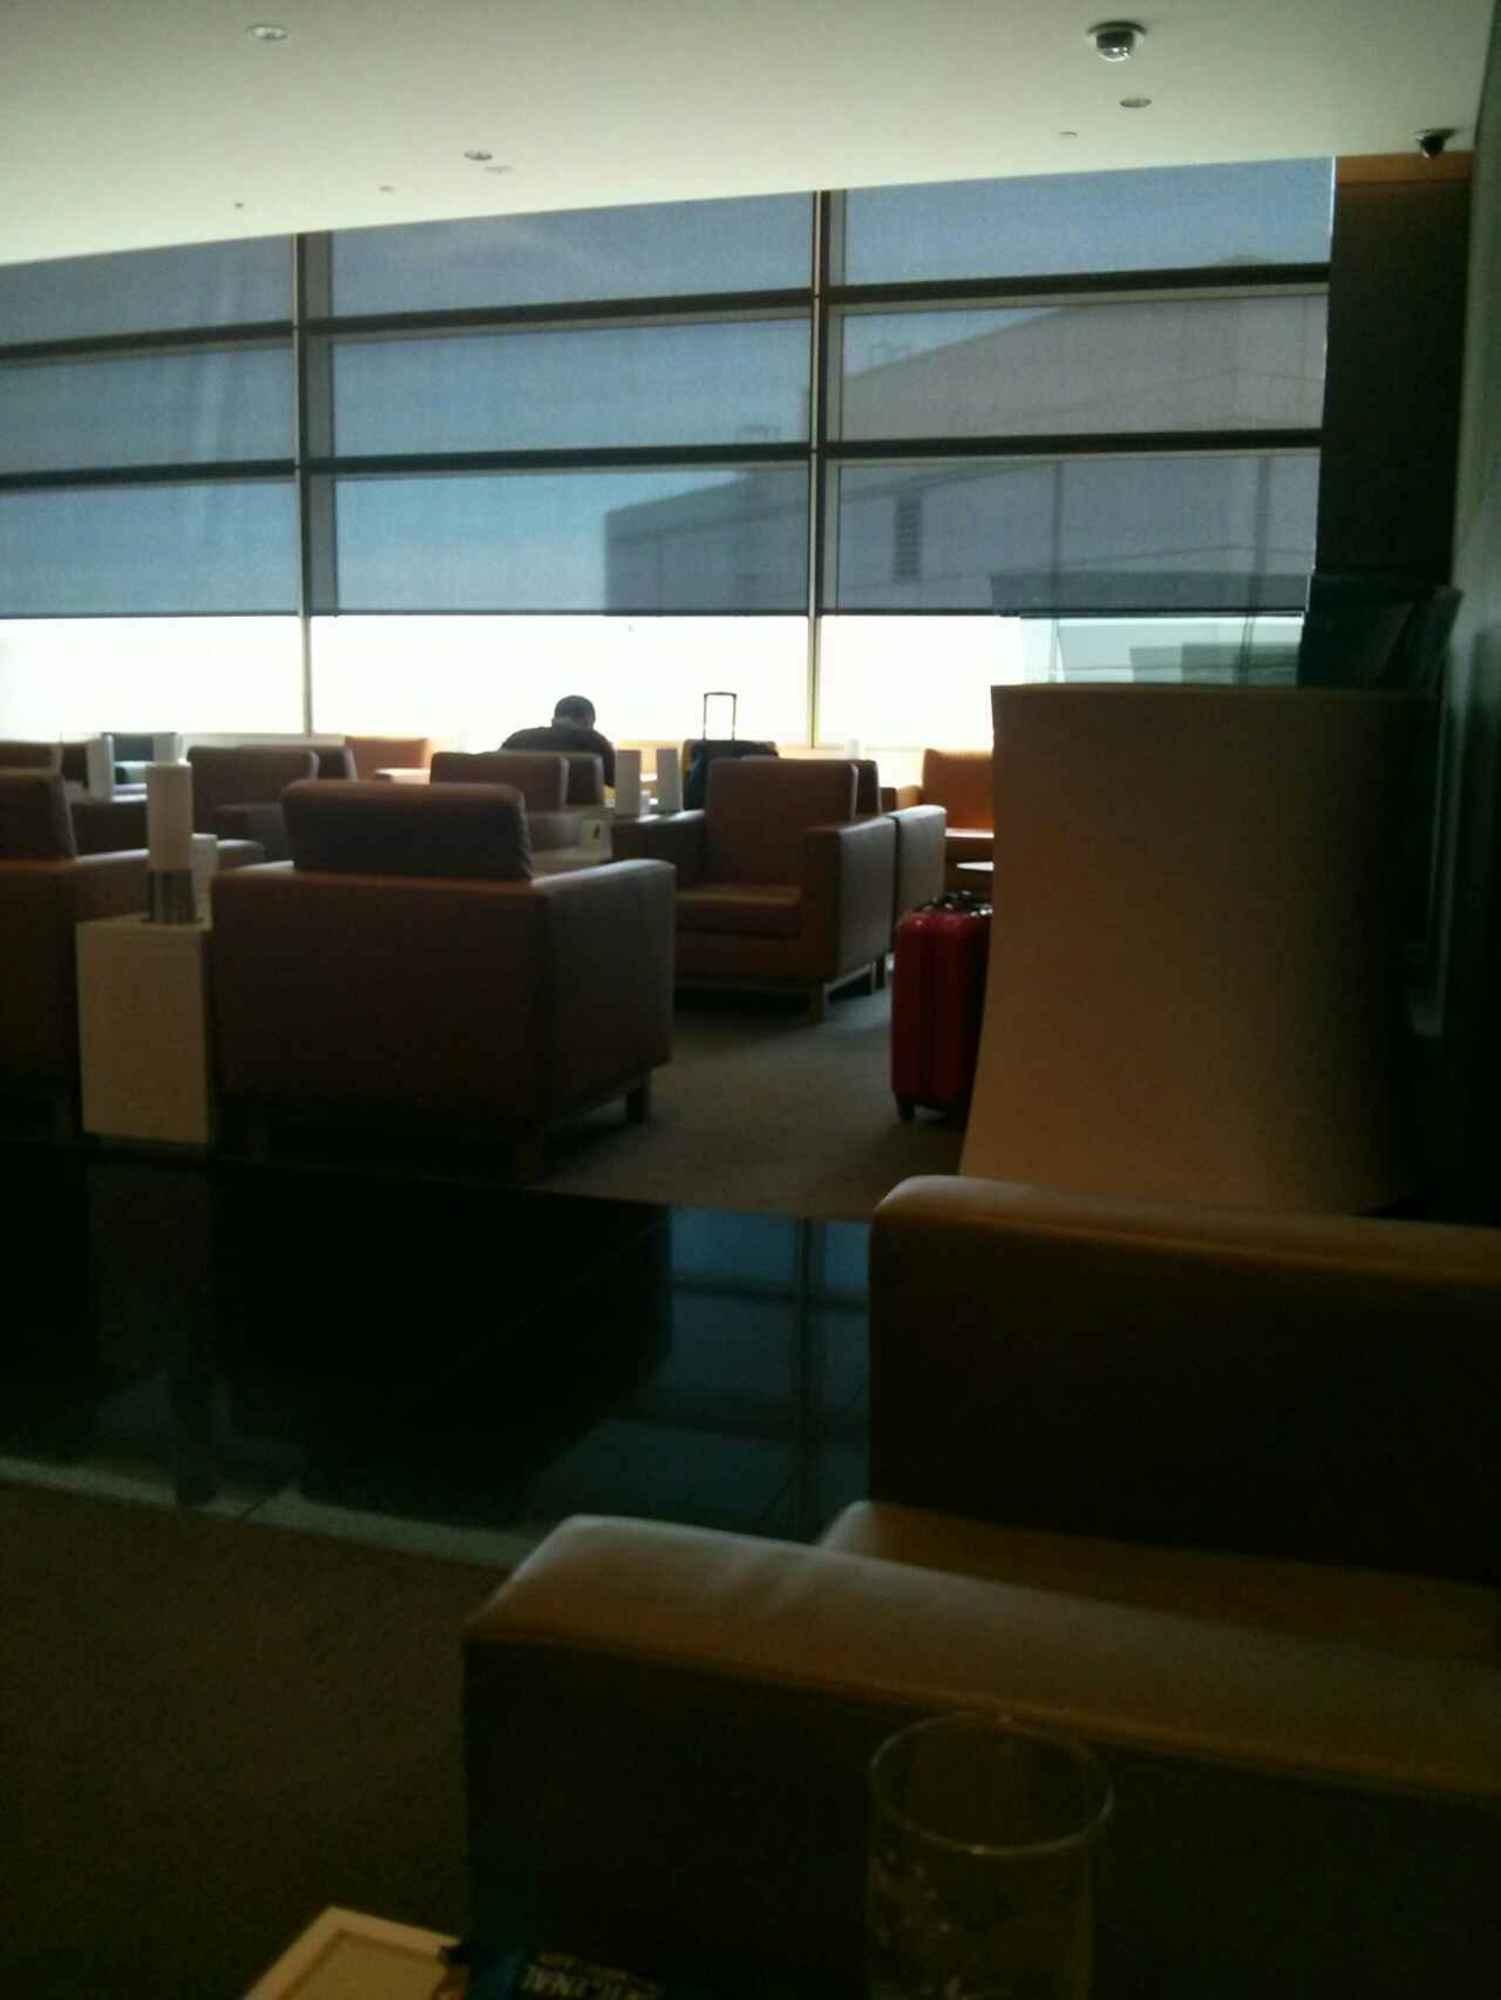 Cathay Pacific First and Business Class Lounge image 22 of 74